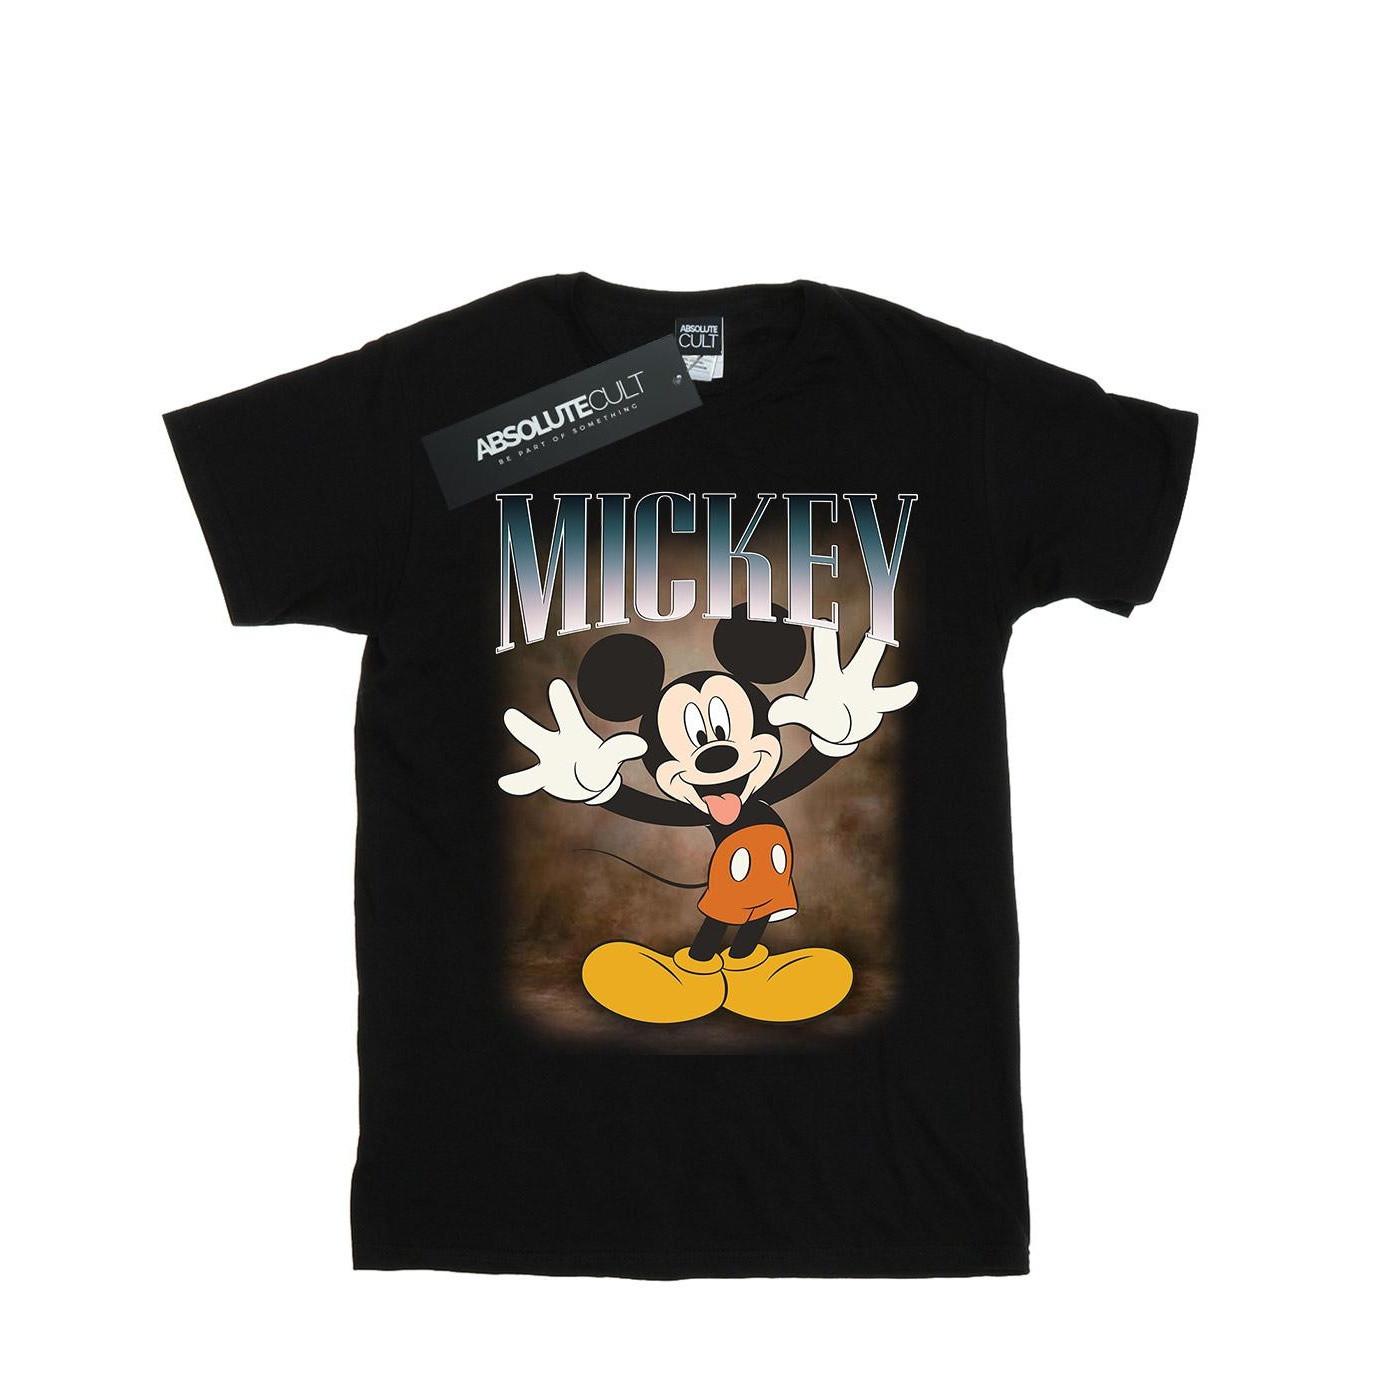 Disney  Tshirt MICKEY MOUSE TONGUE MONTAGE 